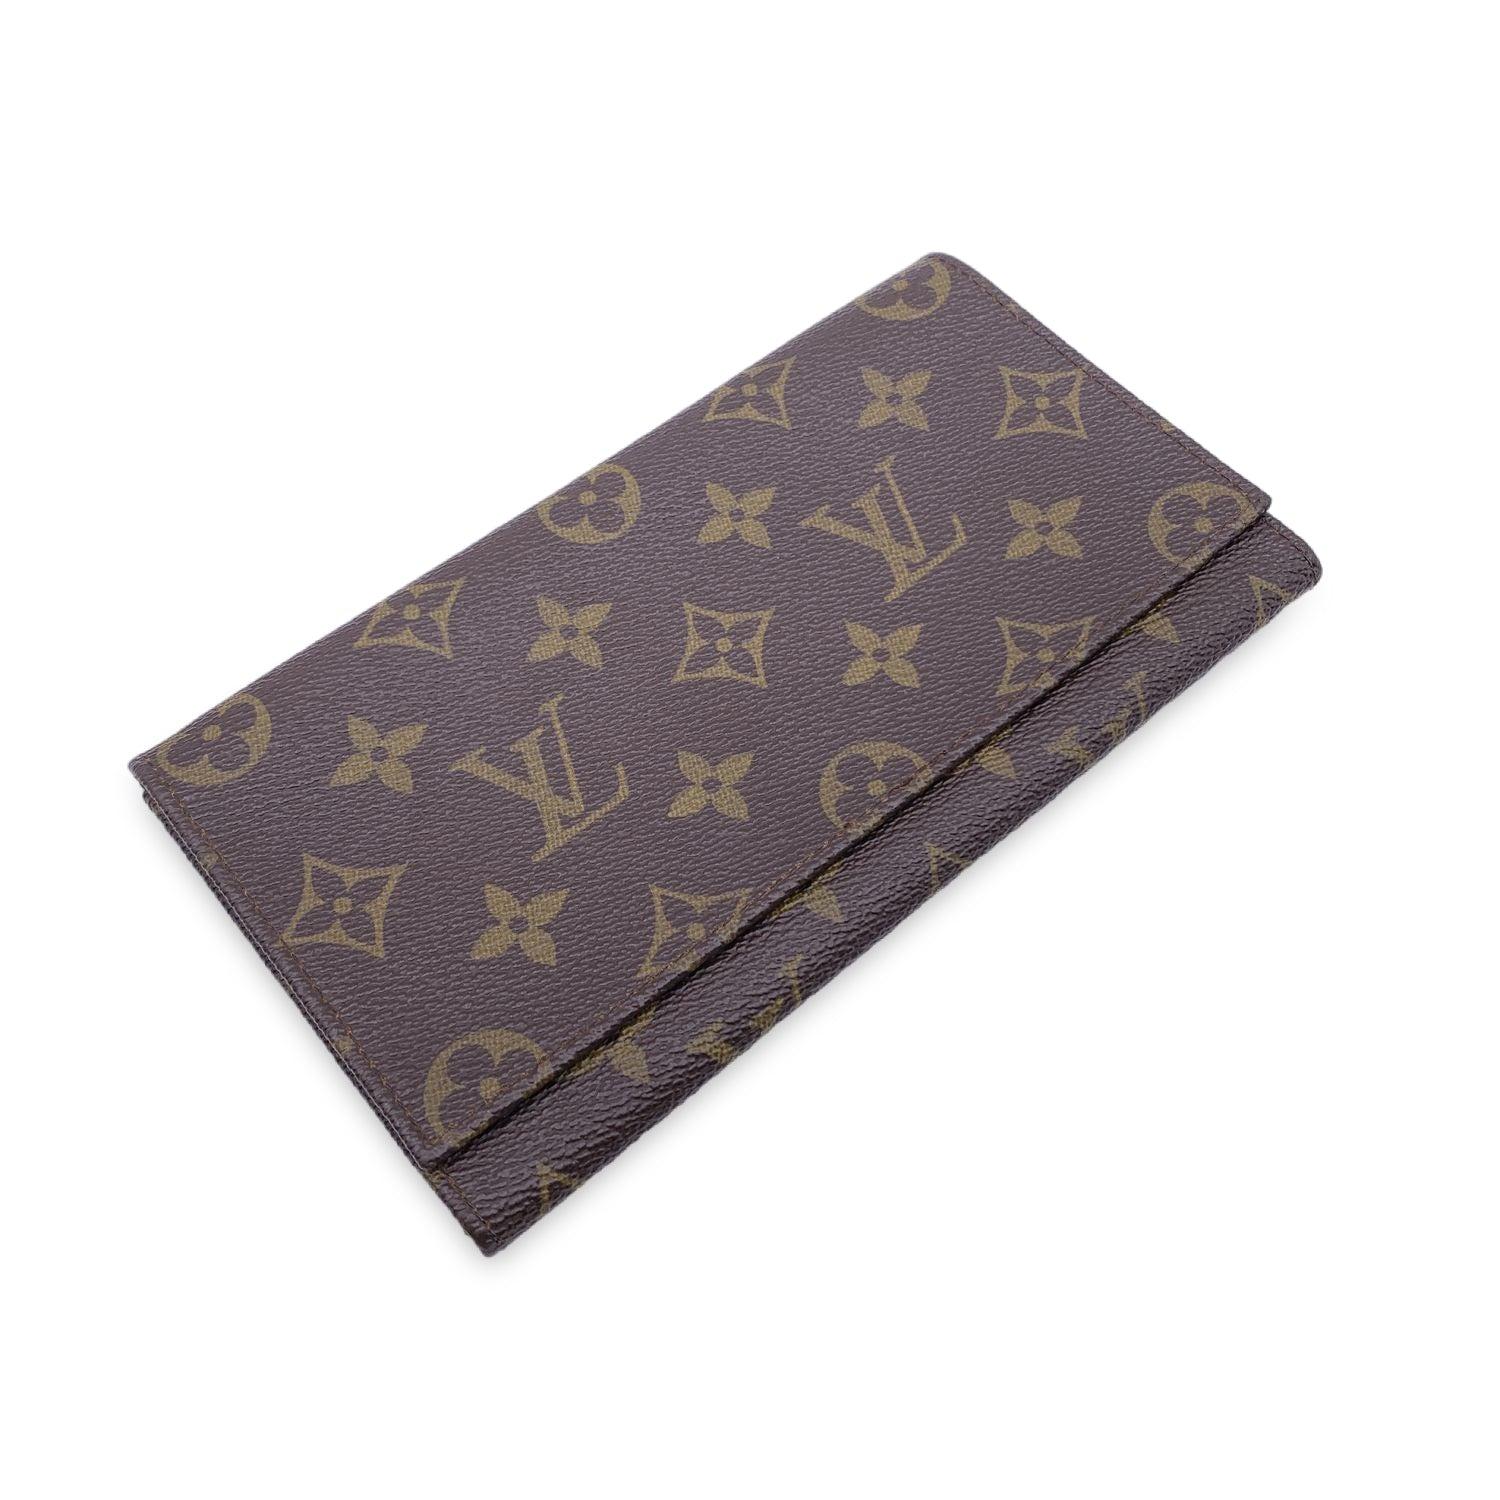 Vintage Louis Vuitton brown monogram canvas Long Bifold Bill Wallet. Flap closure. Leather lining. 1 main compartments inside. 'LOUIS VUITTON Paris - made in France' engraved inside. Details MATERIAL: Cloth COLOR: Brown MODEL: n.a. GENDER: Women